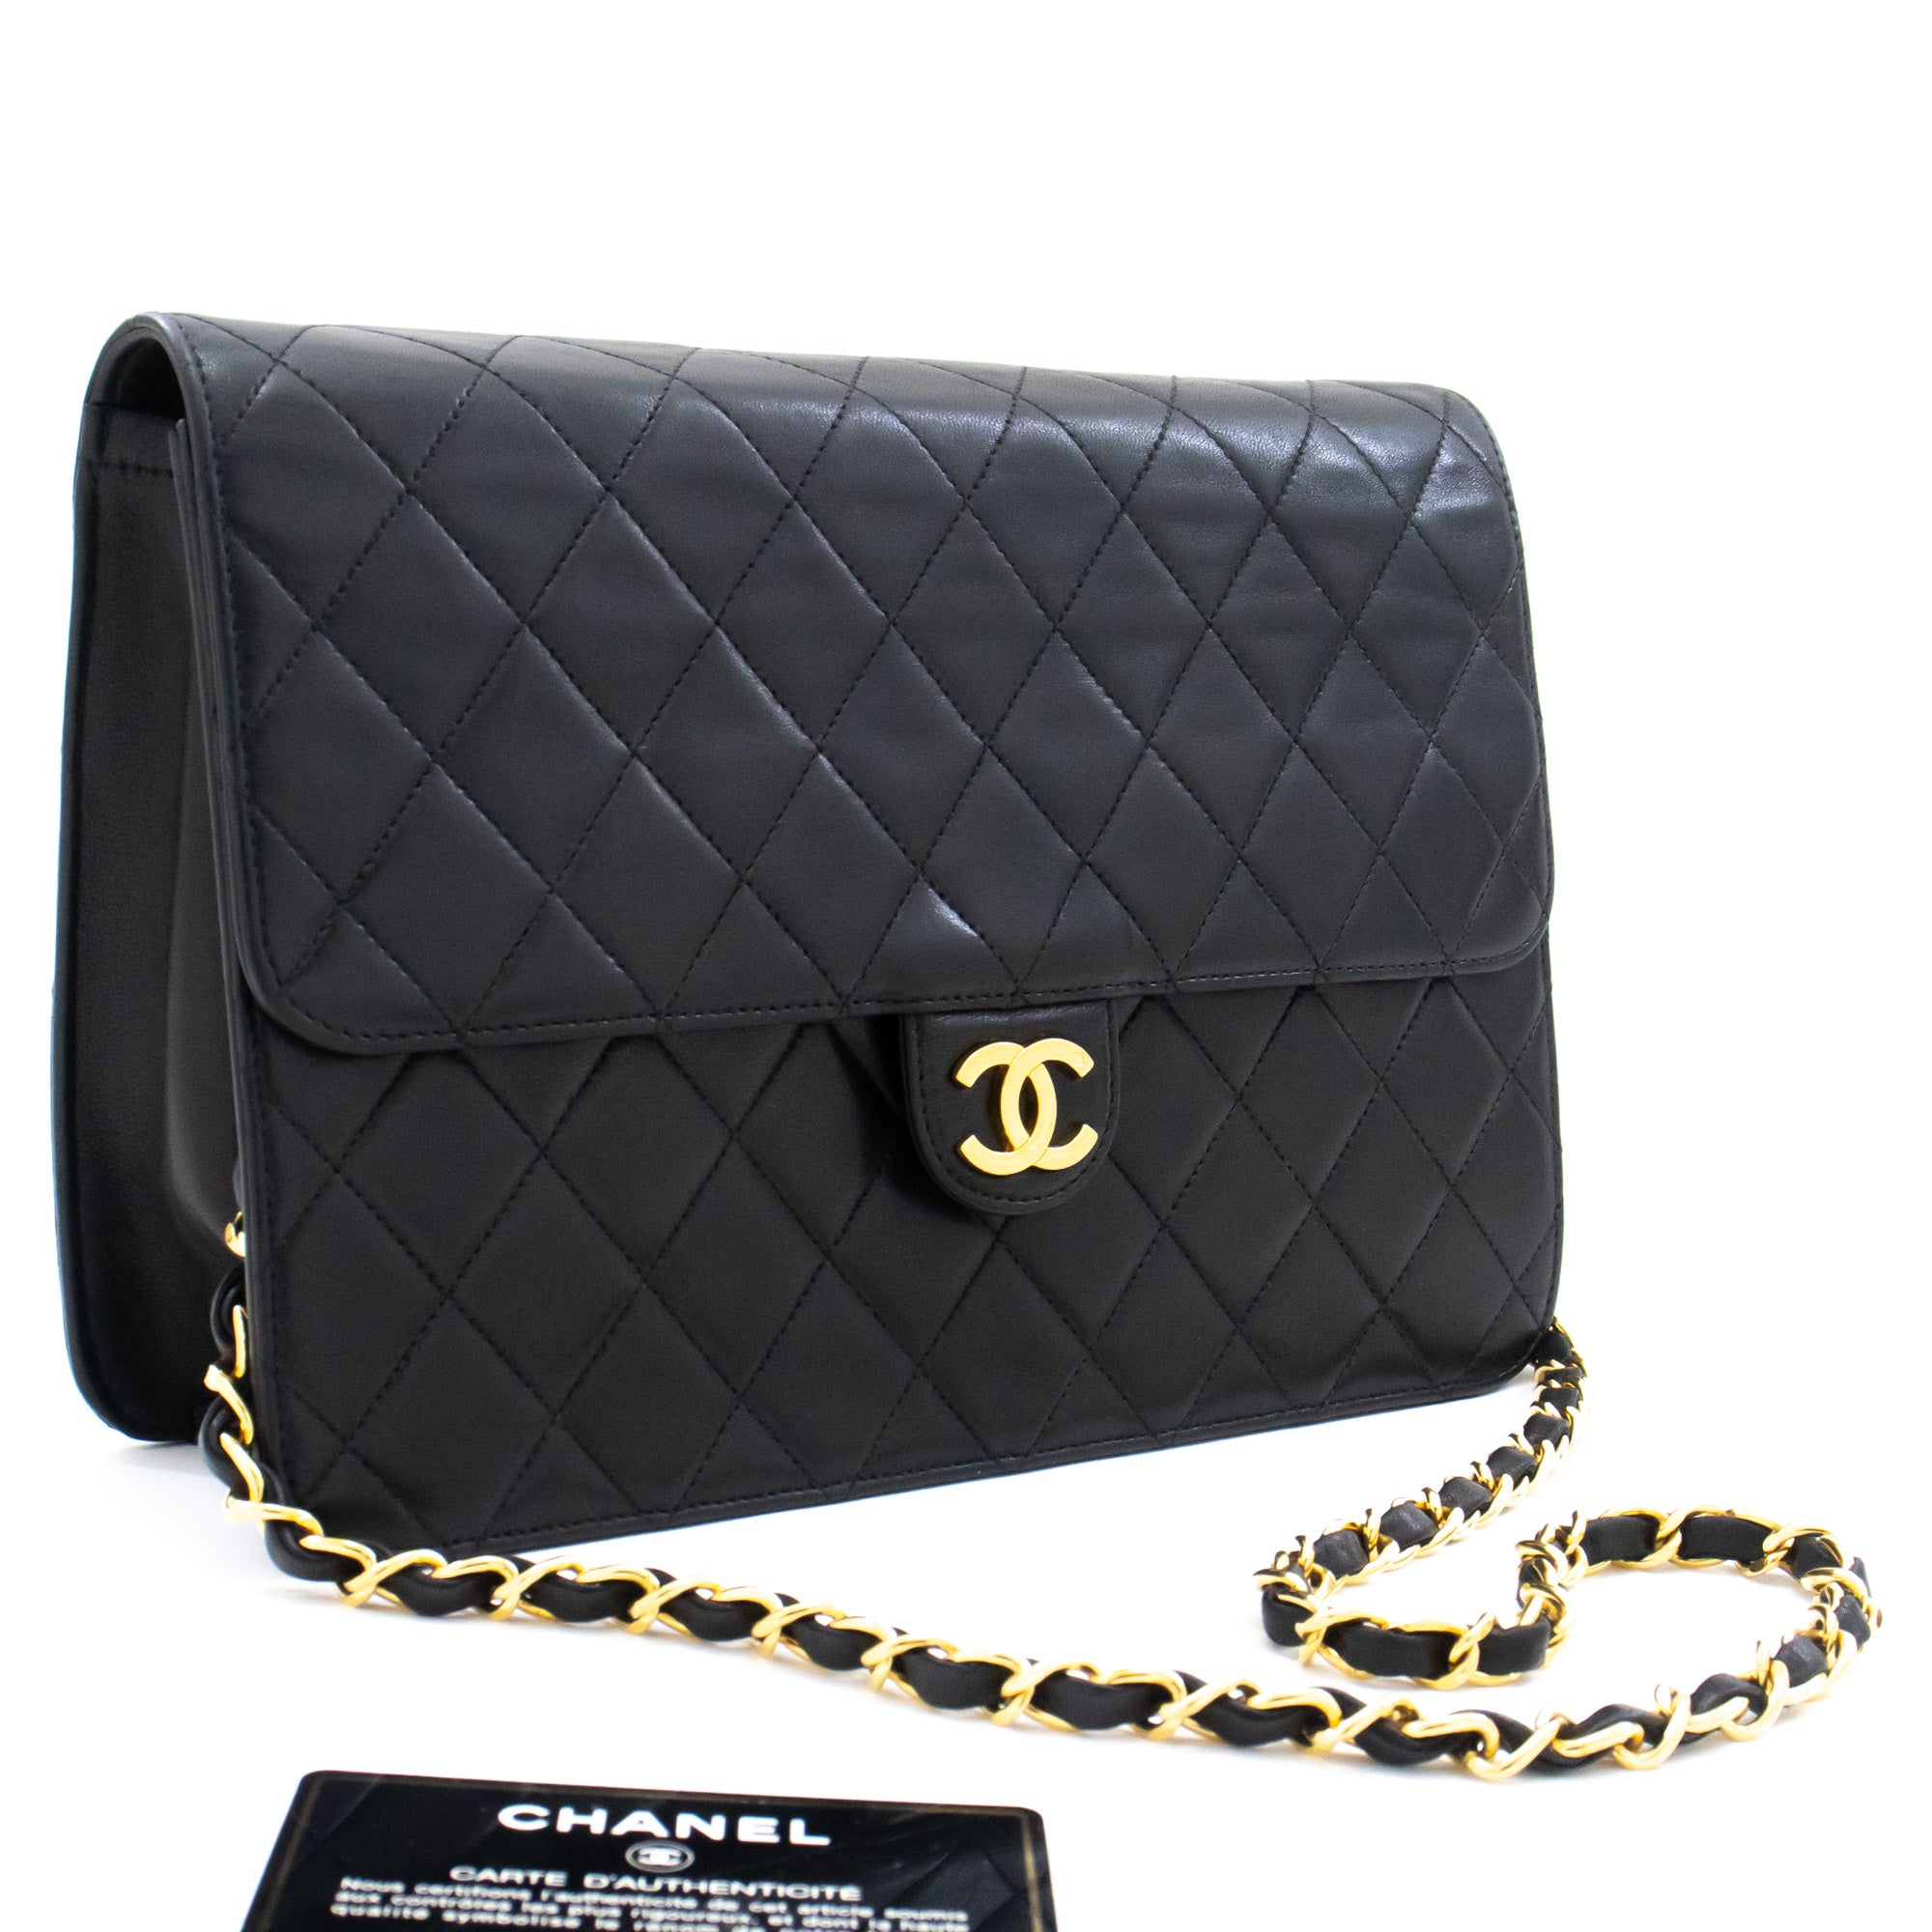 Vintage Chanel 23cm Black Quilted Lambskin “CC” Turnlock Full Flap